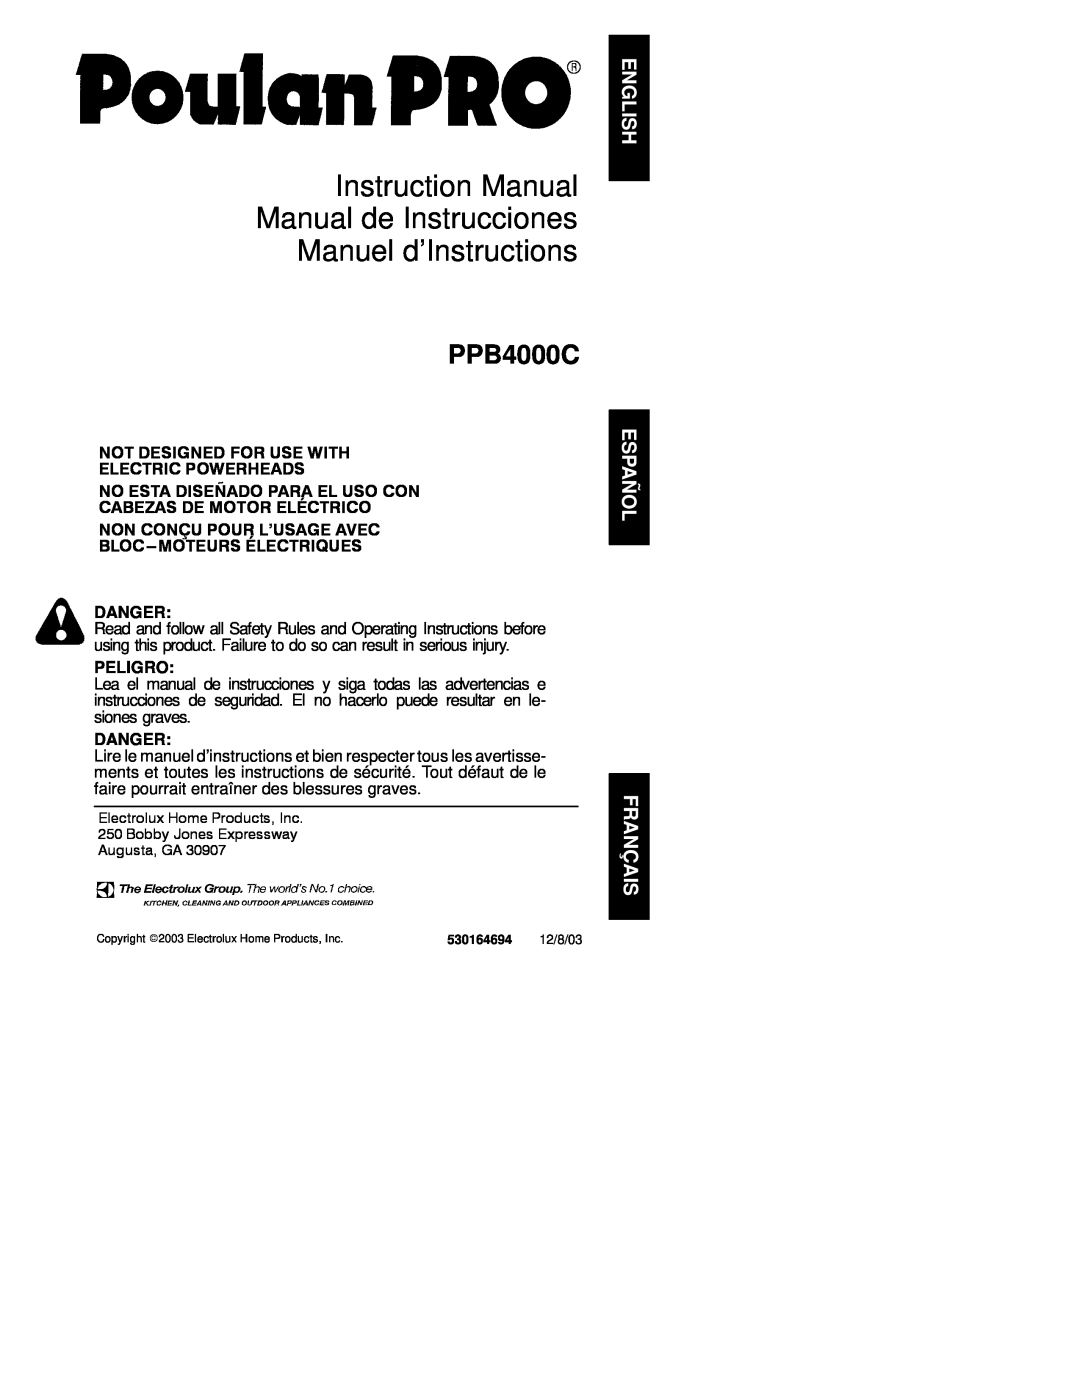 Poulan PPB4000C instruction manual Not Designed For Use With Electric Powerheads, Danger, Peligro 